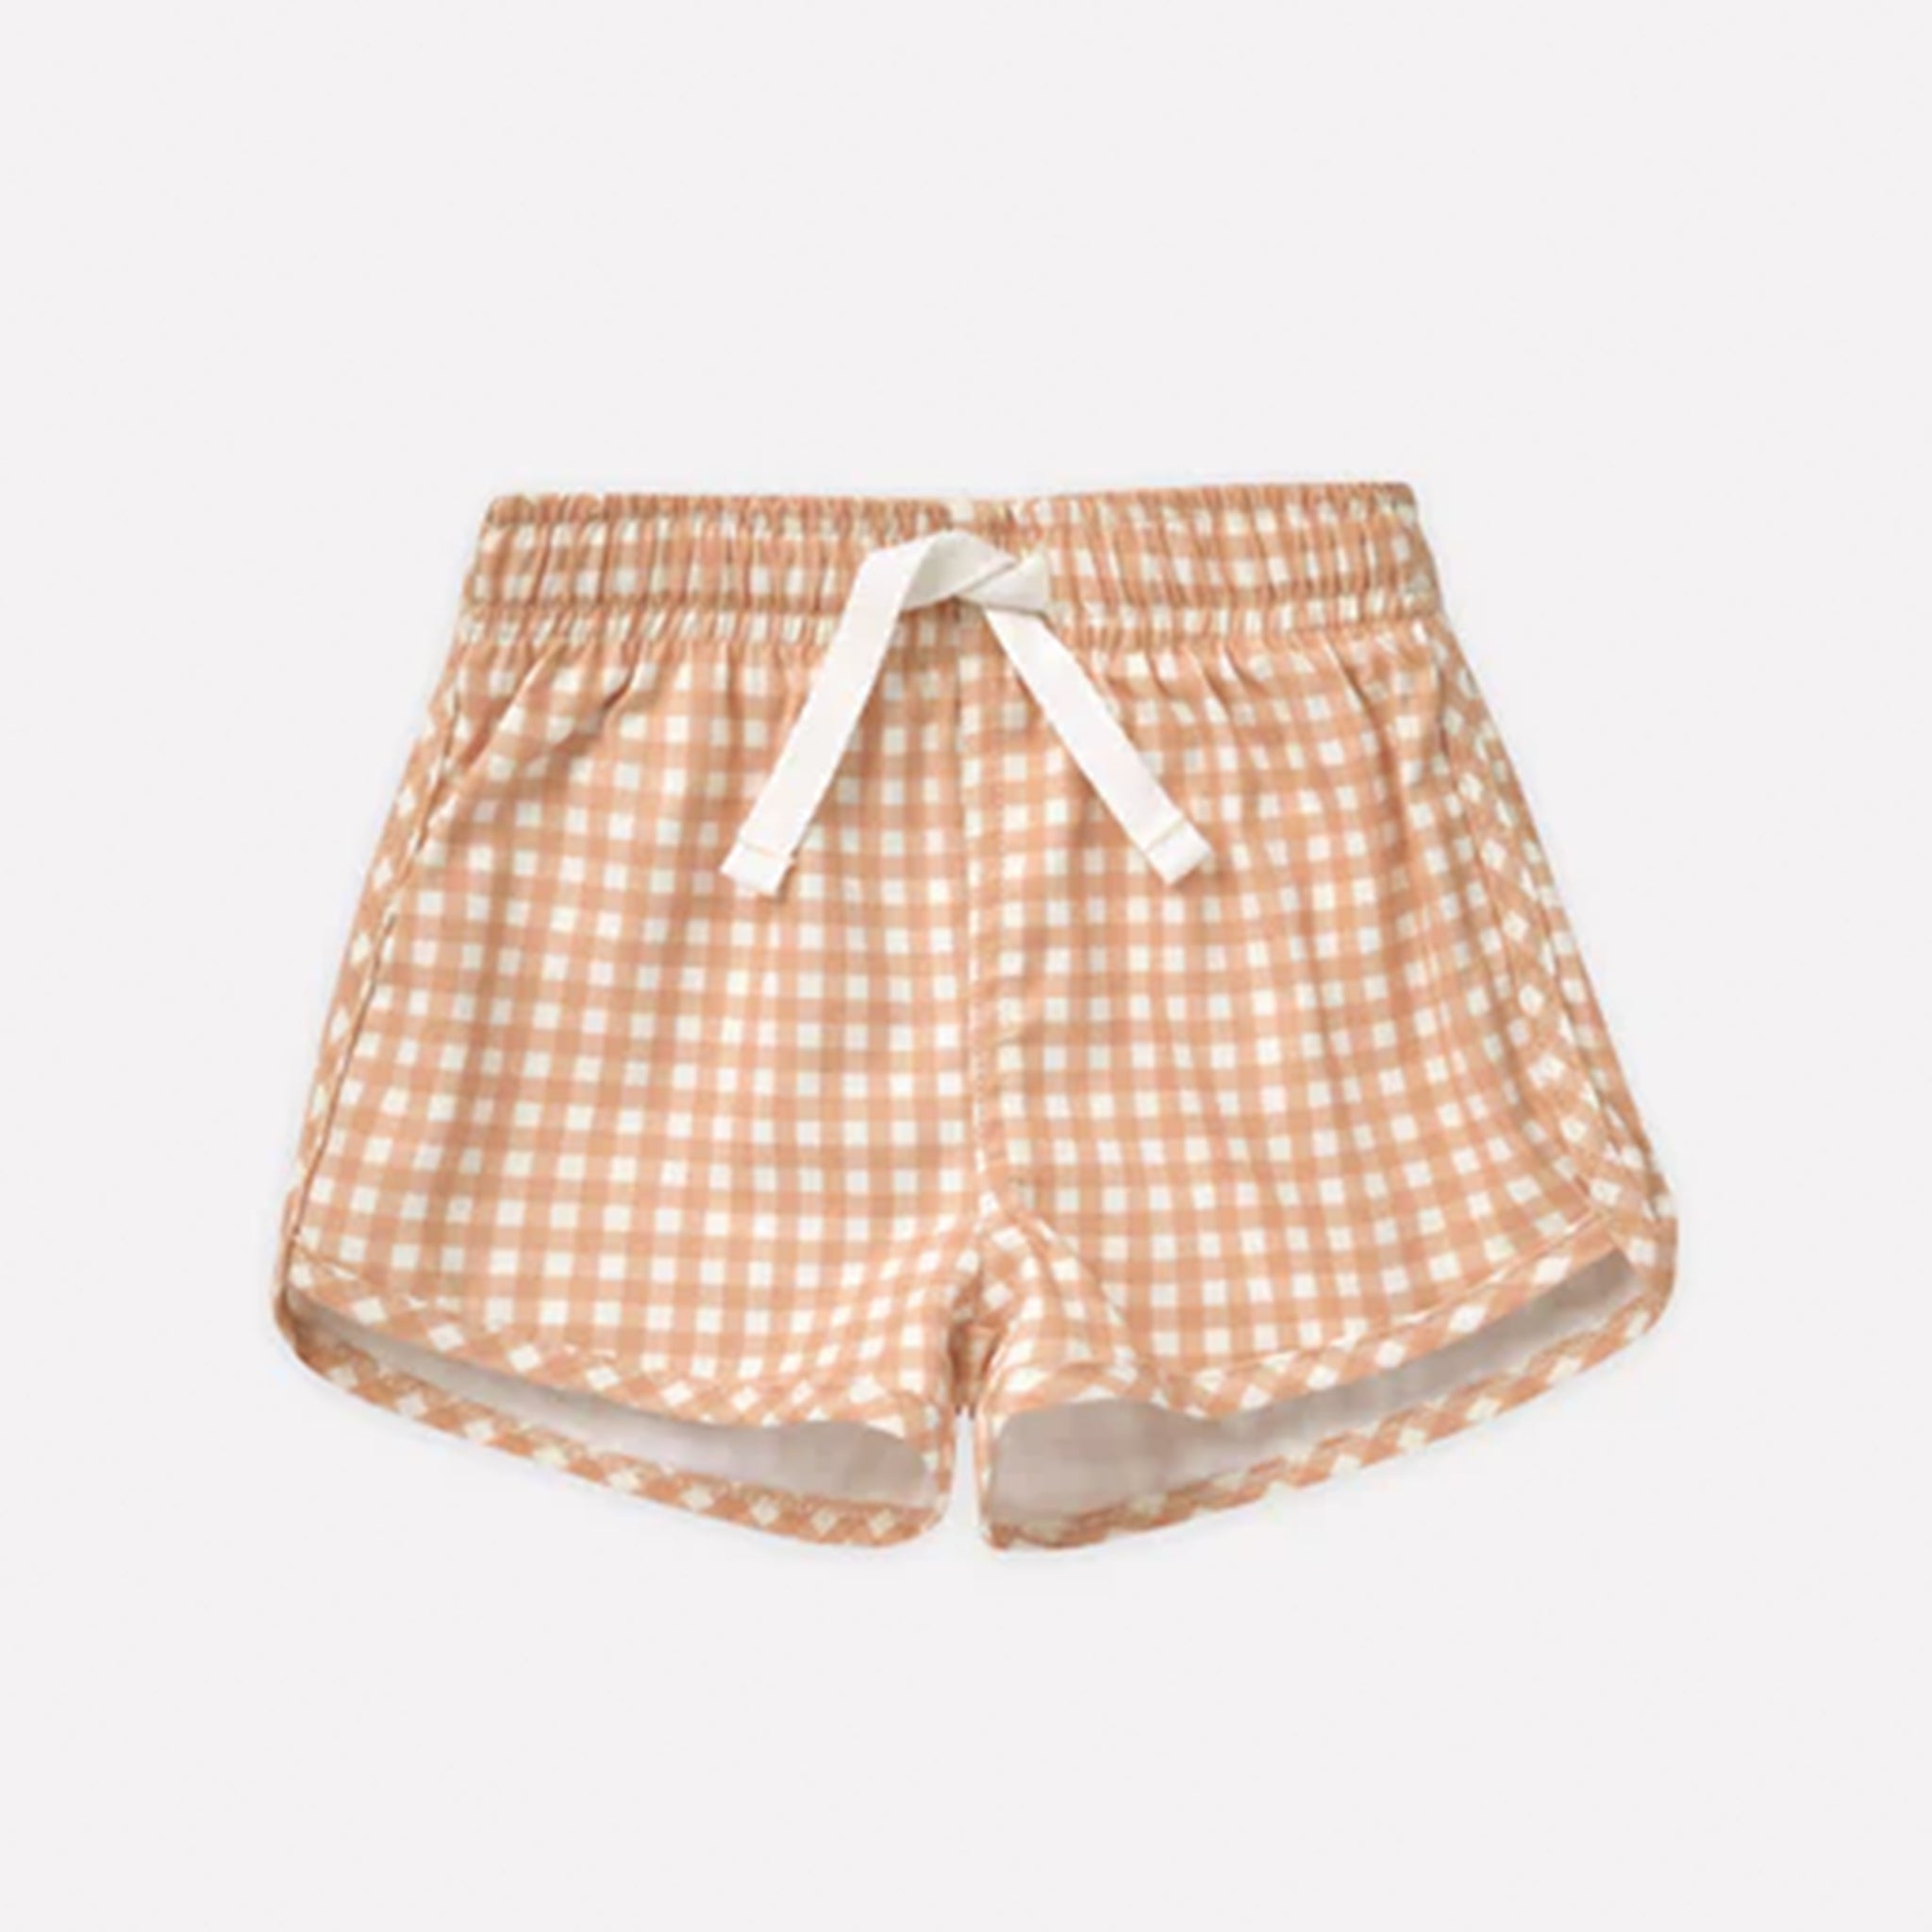 On a white background is a pair of white and light orange gingham printed swim trunks with a white drawstring. 